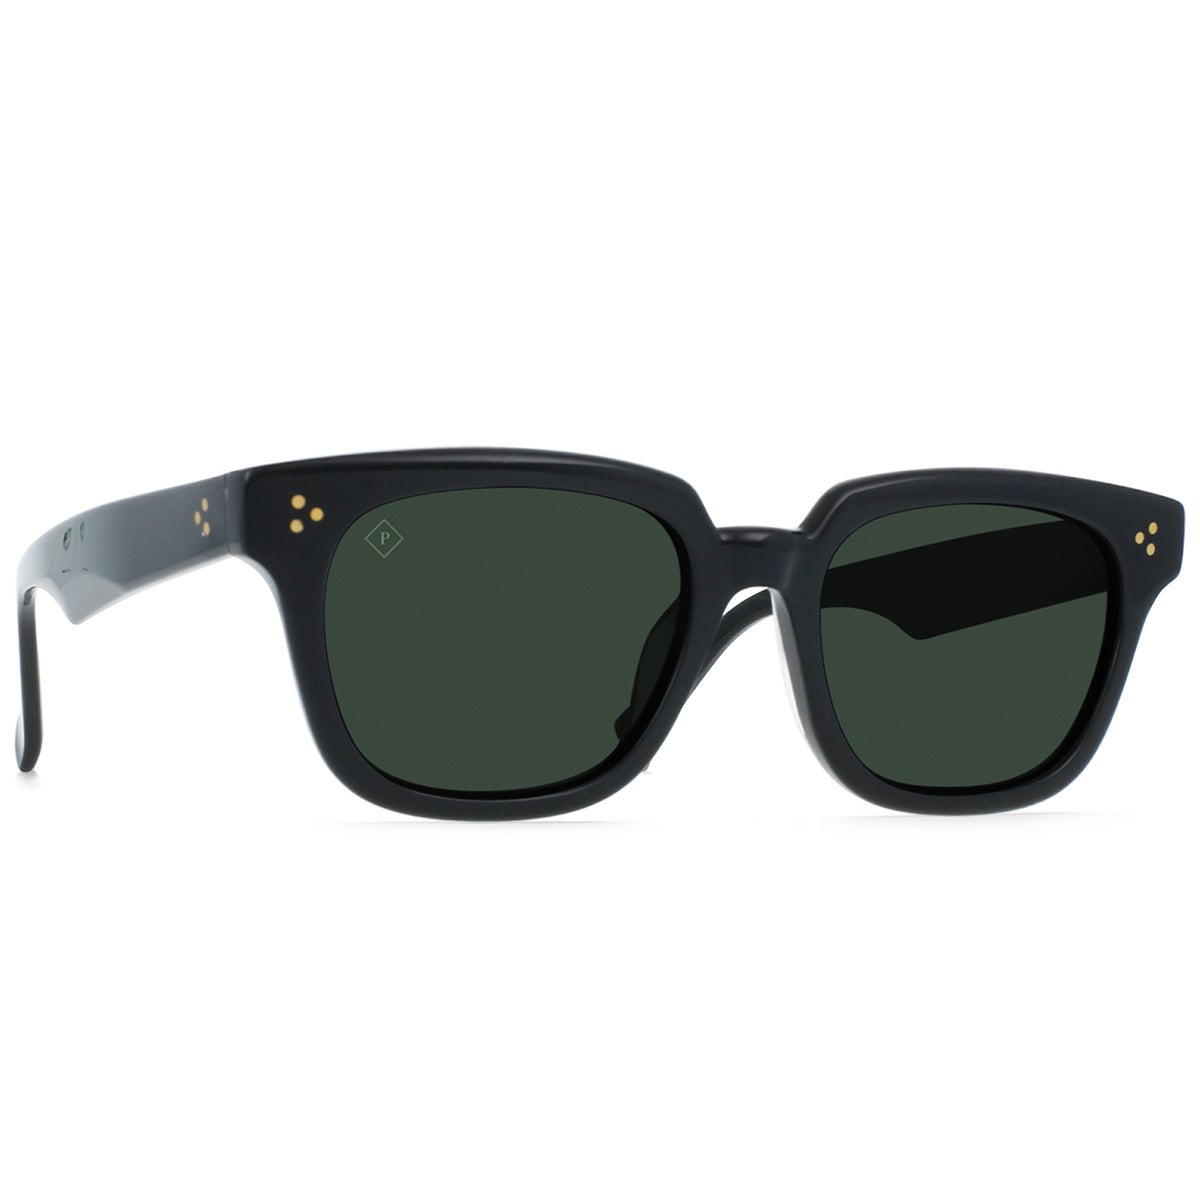 Buy Raen Remmy 49 Polarized Round Sunglasses, Ghost, One Size at Amazon.in